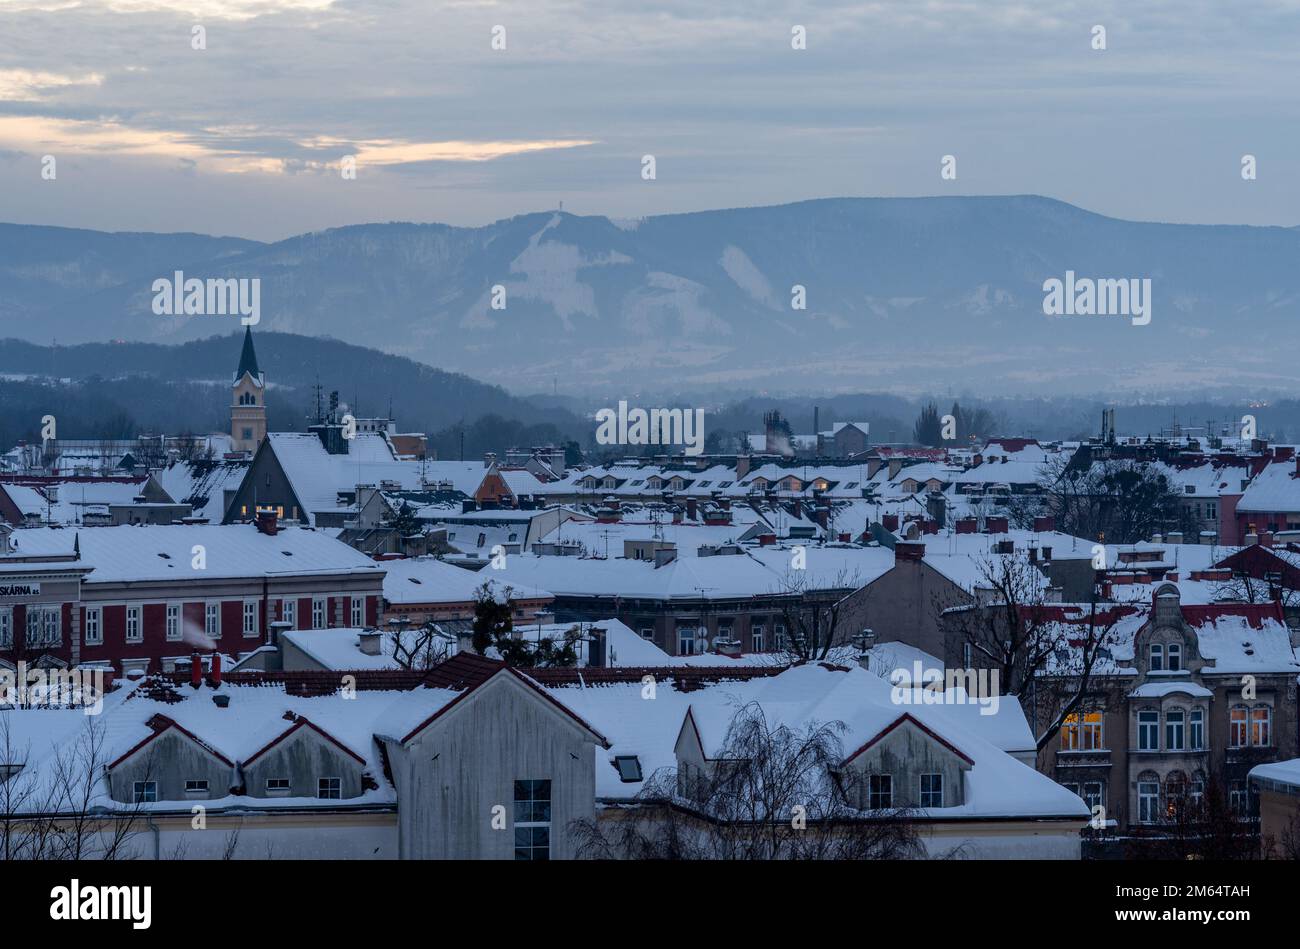 Townscape of Cesky Tesin, Moravian silesian region, Czech Republic, snow covered roofs and beskid mountains in the background Stock Photo